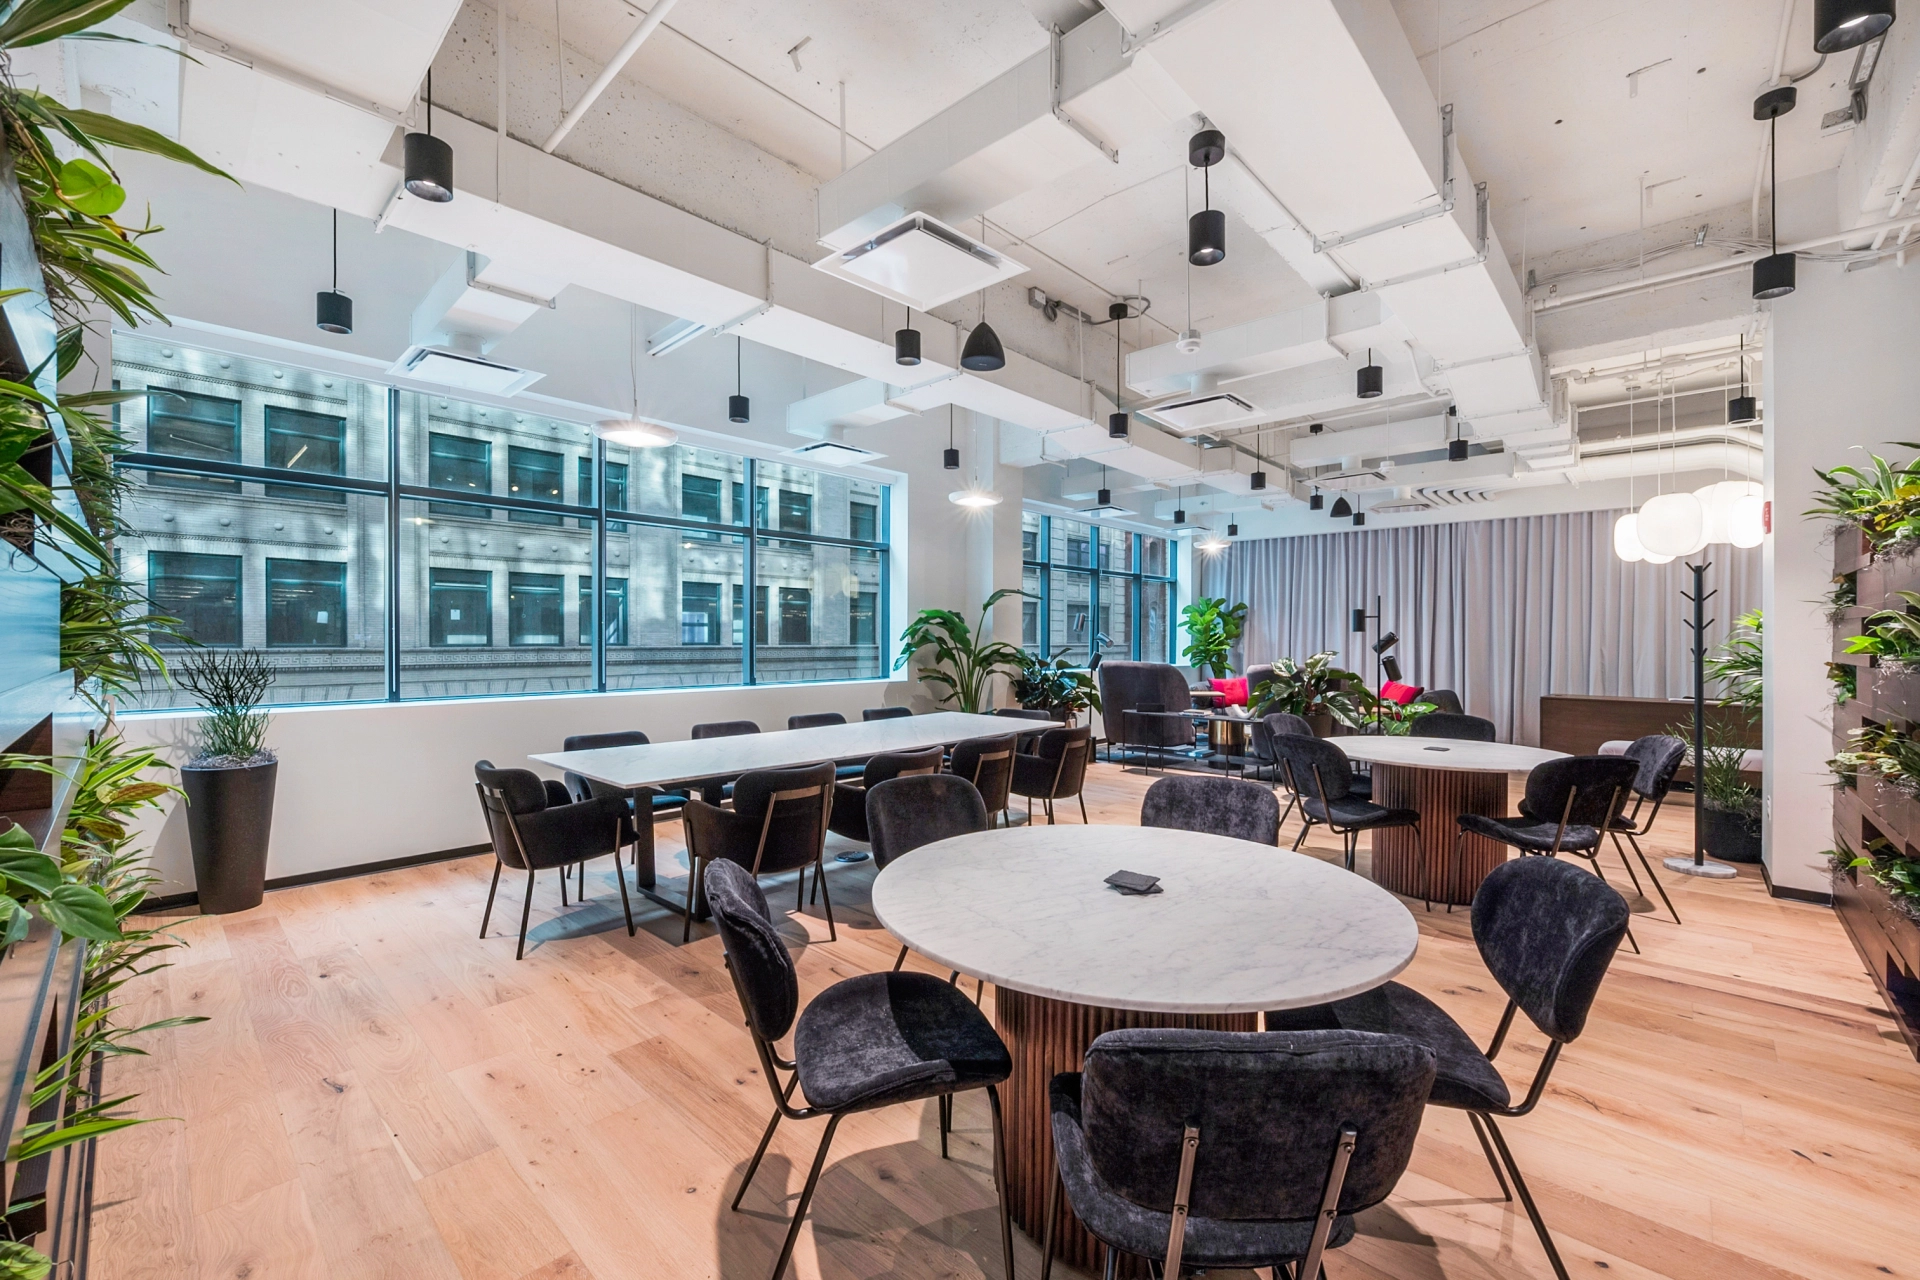 A coworking space featuring a meeting room equipped with a table, chairs, and plants.